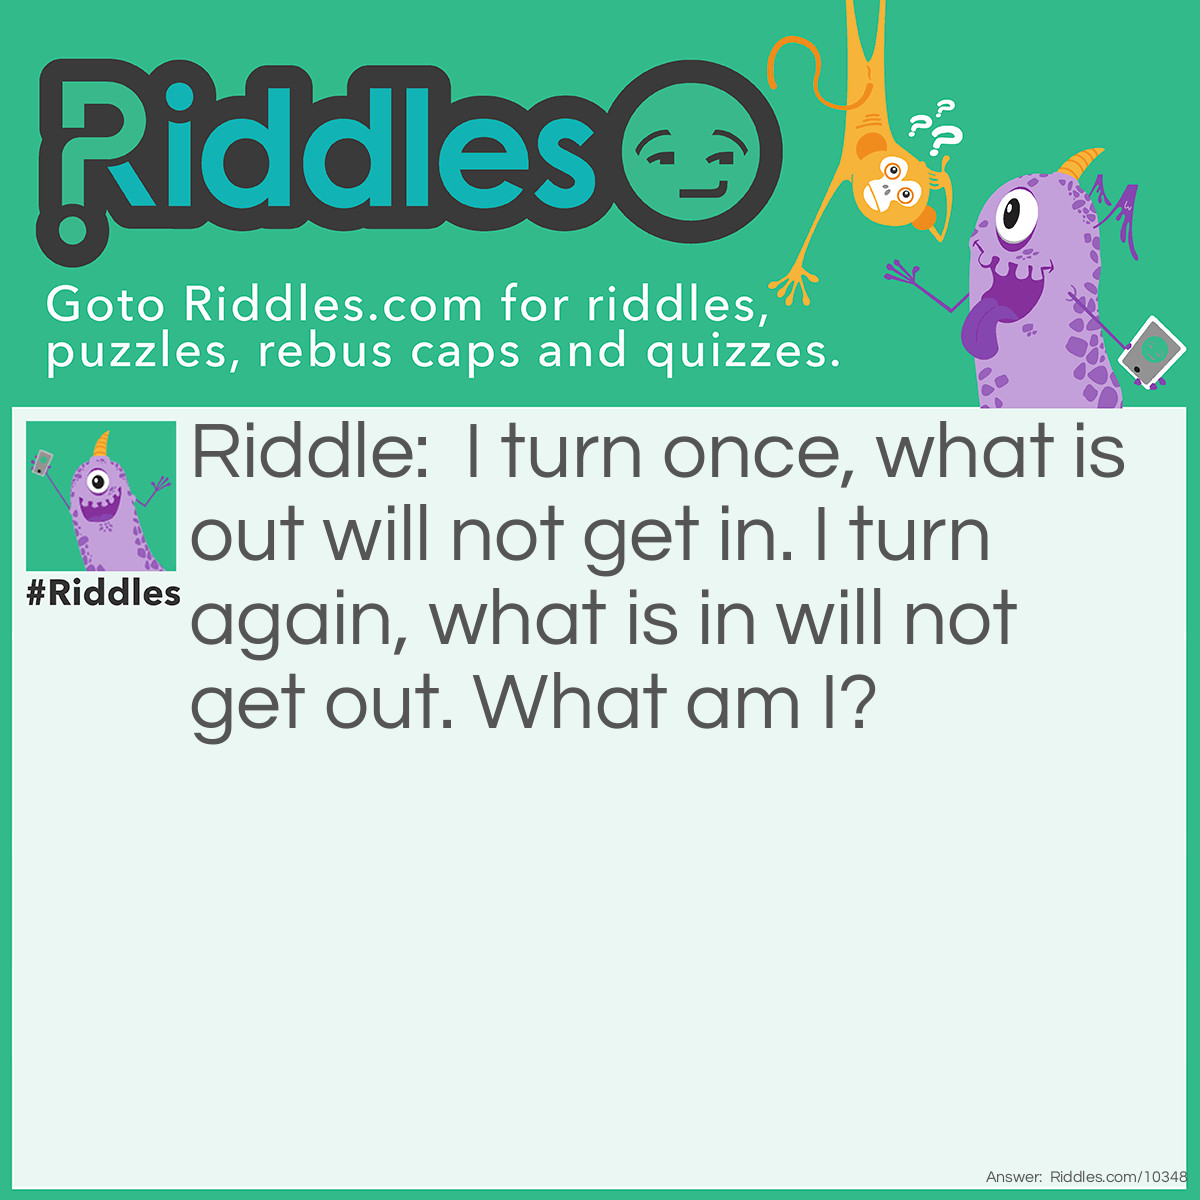 Riddle: I turn once, what is out will not get in. I turn again, what is in will not get out. What am I? Answer: A key lock